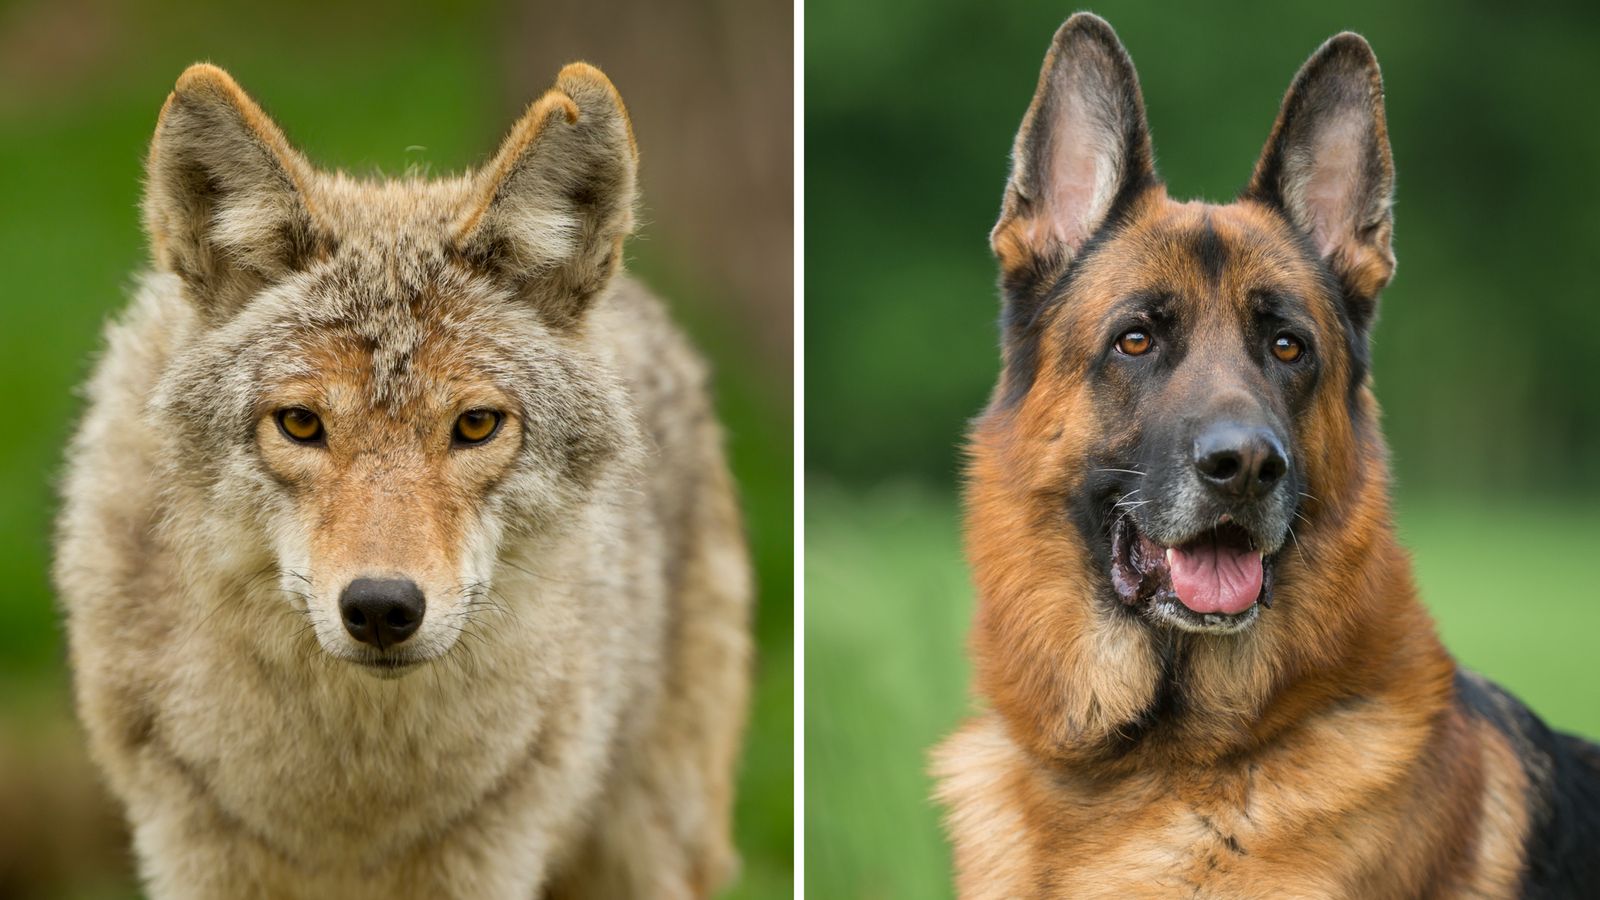 Hunter shoots and skins 'coyotes' only to discover they were a family's treasured German shepherds